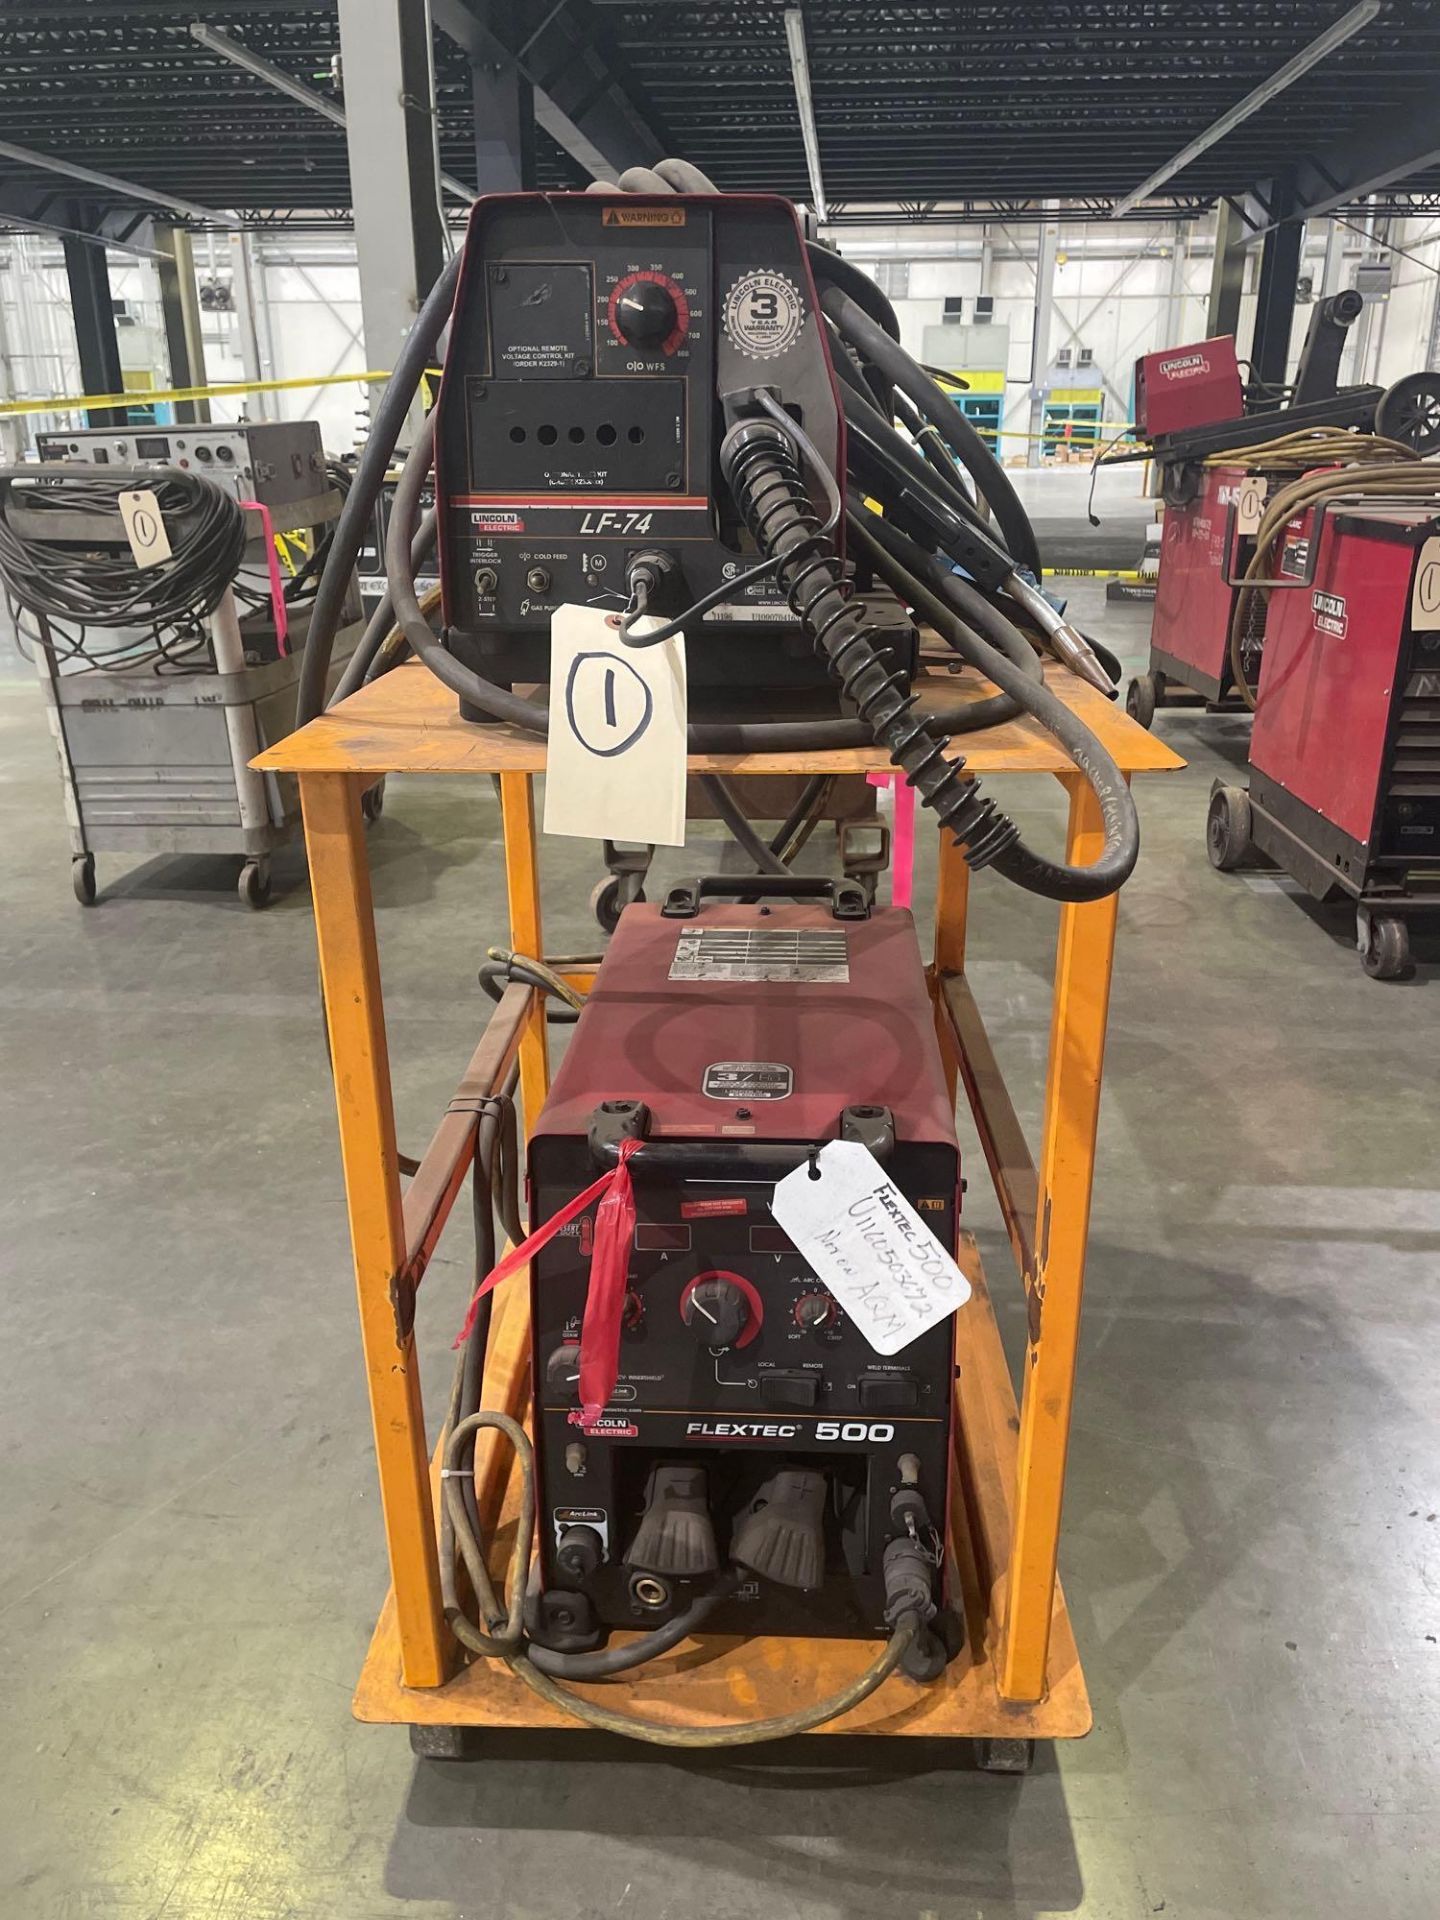 Lincoln Electric Flextec 500 Welding Power Source with LF-74 Wire Feeder